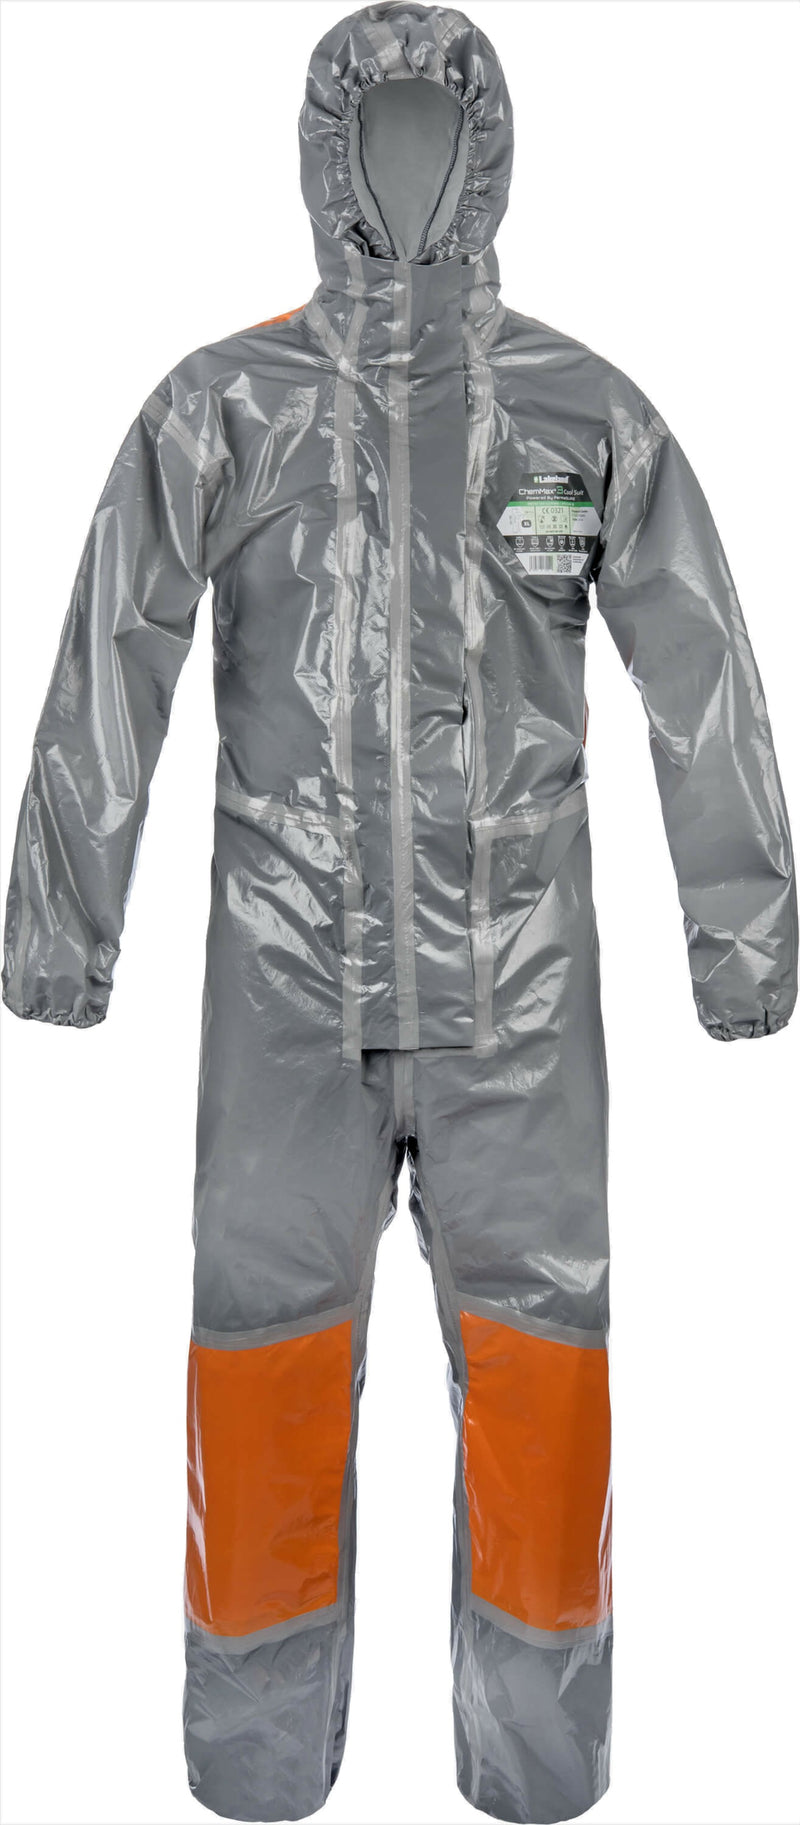 ChemMax® 3 - Cool Suit® chemical protection suit